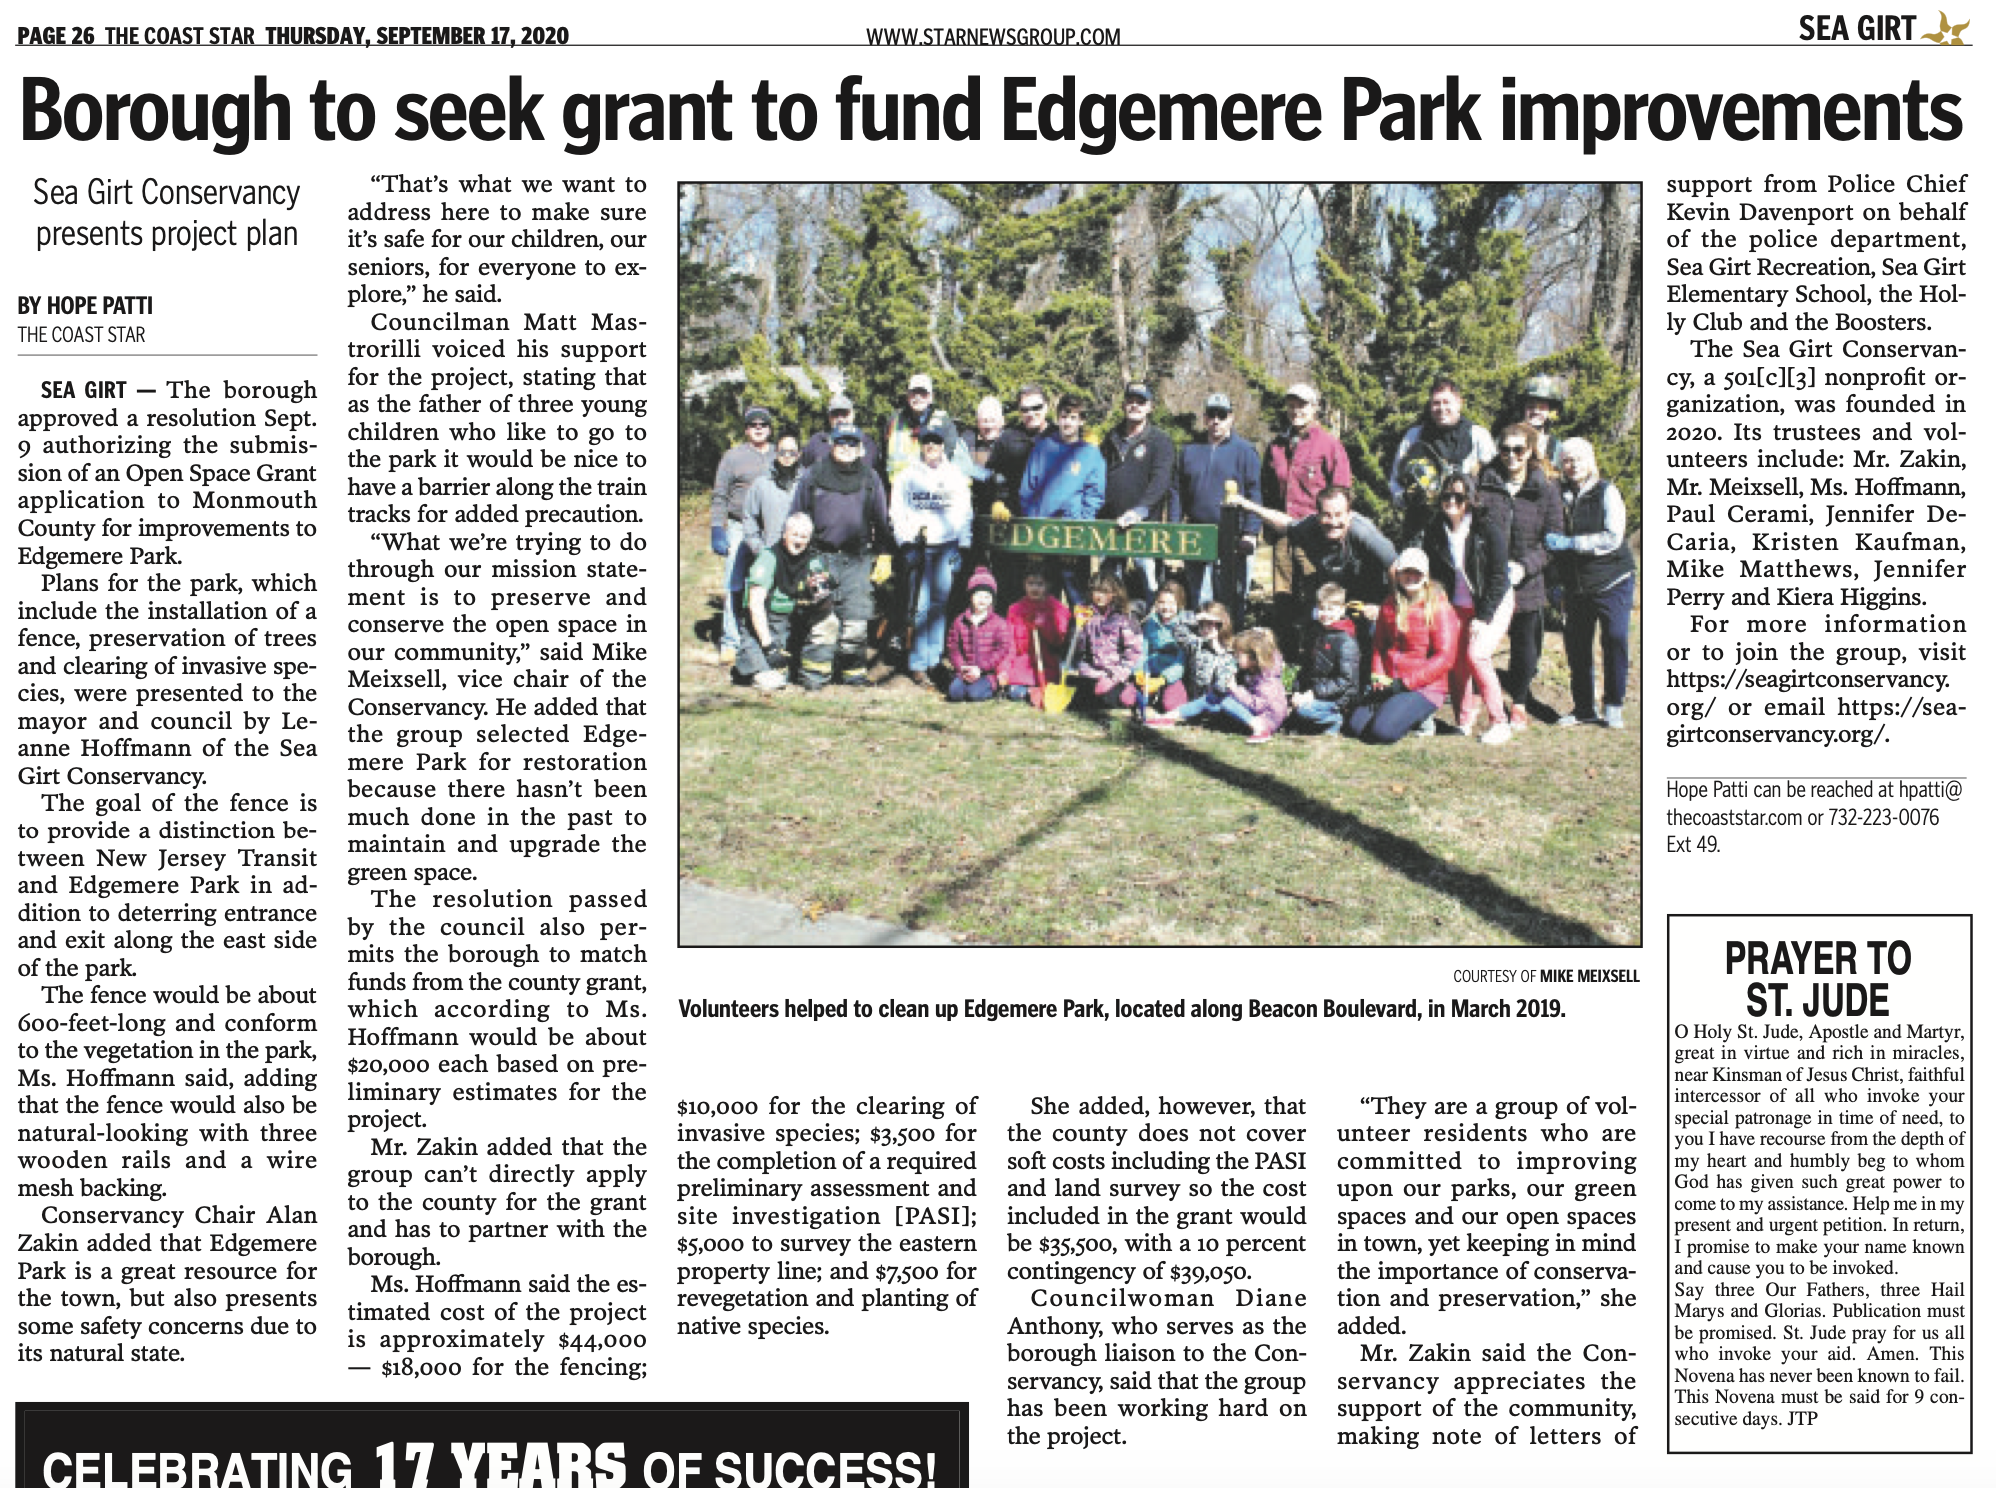 Borough Seeks Grant to fund Edgemere Park originally published by The Coast Star